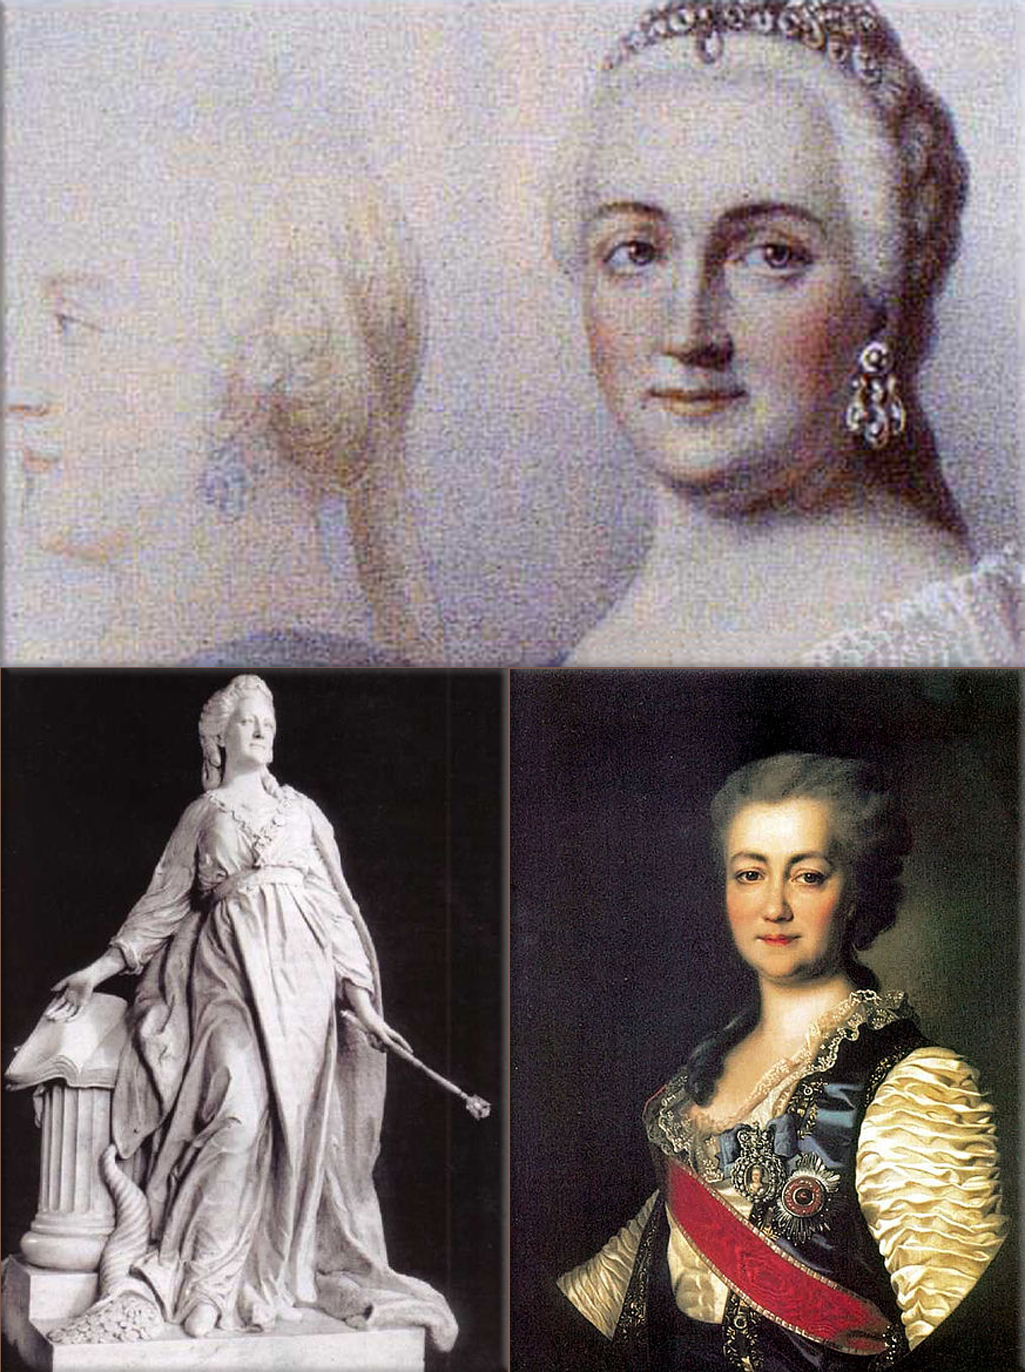 Catherine II 'the Great' - She revitalized Russia making it one of the most powerful nations in Europe and ushering in the Golden Age of the Russian Empire